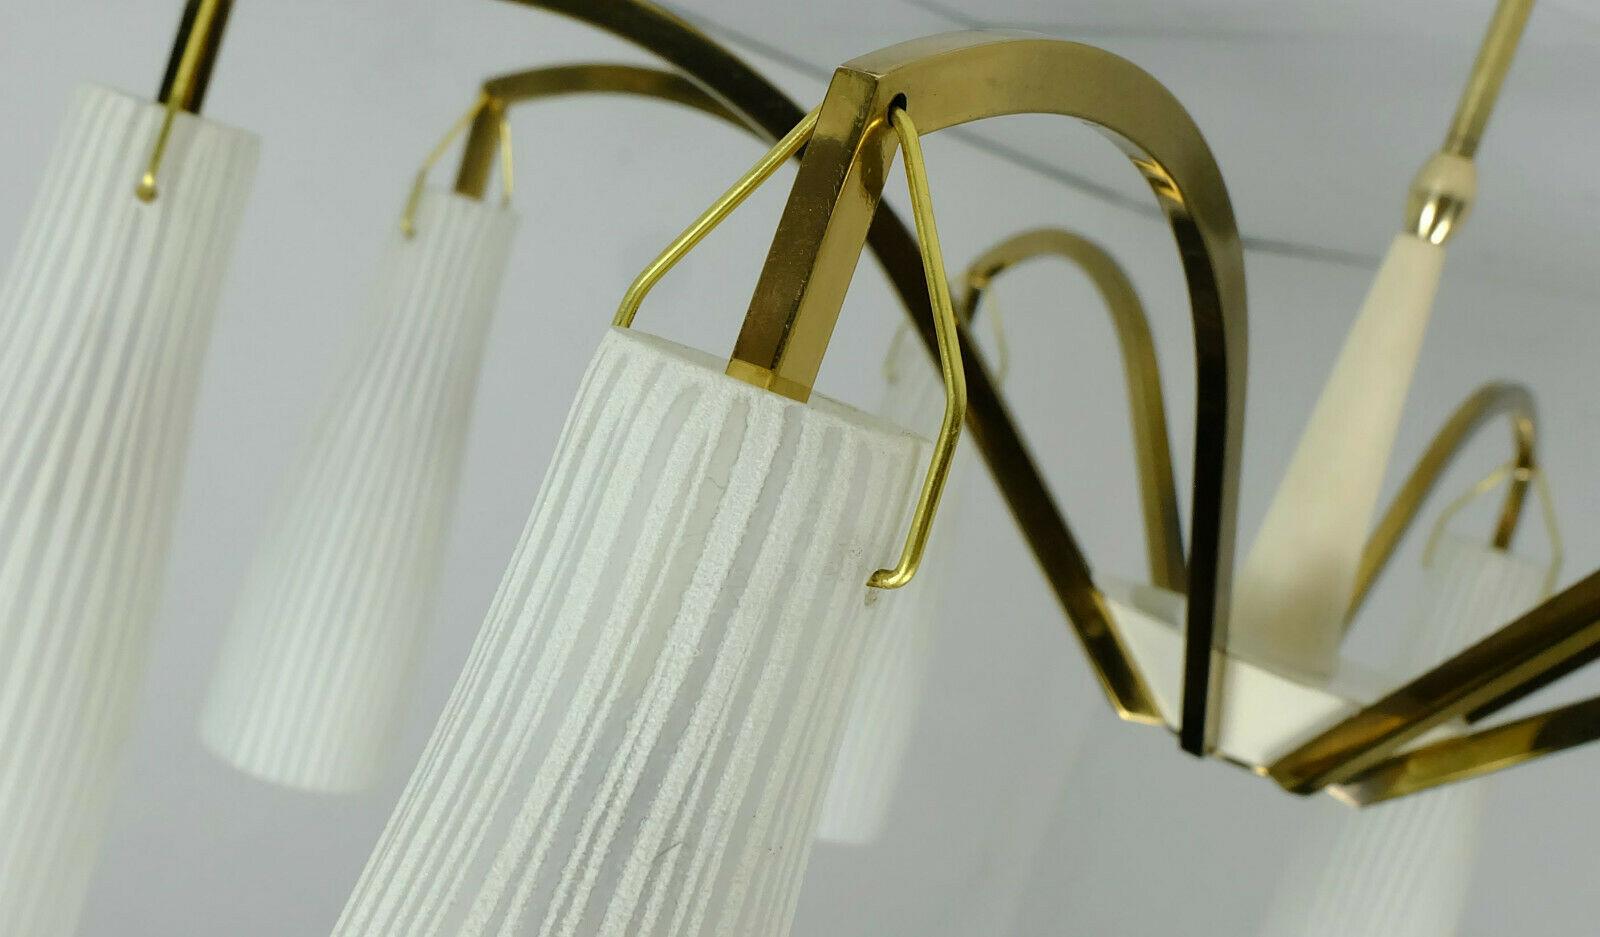 Fantastic large 1950s hanging lamp. Made of brass and beige lacquered metal. 8 shades made of white glass with fine stripes and rough surface. For 8 E14 bulbs (bulbs on the pictures are not included in the price).

Dimensions: diameter 27 1/2